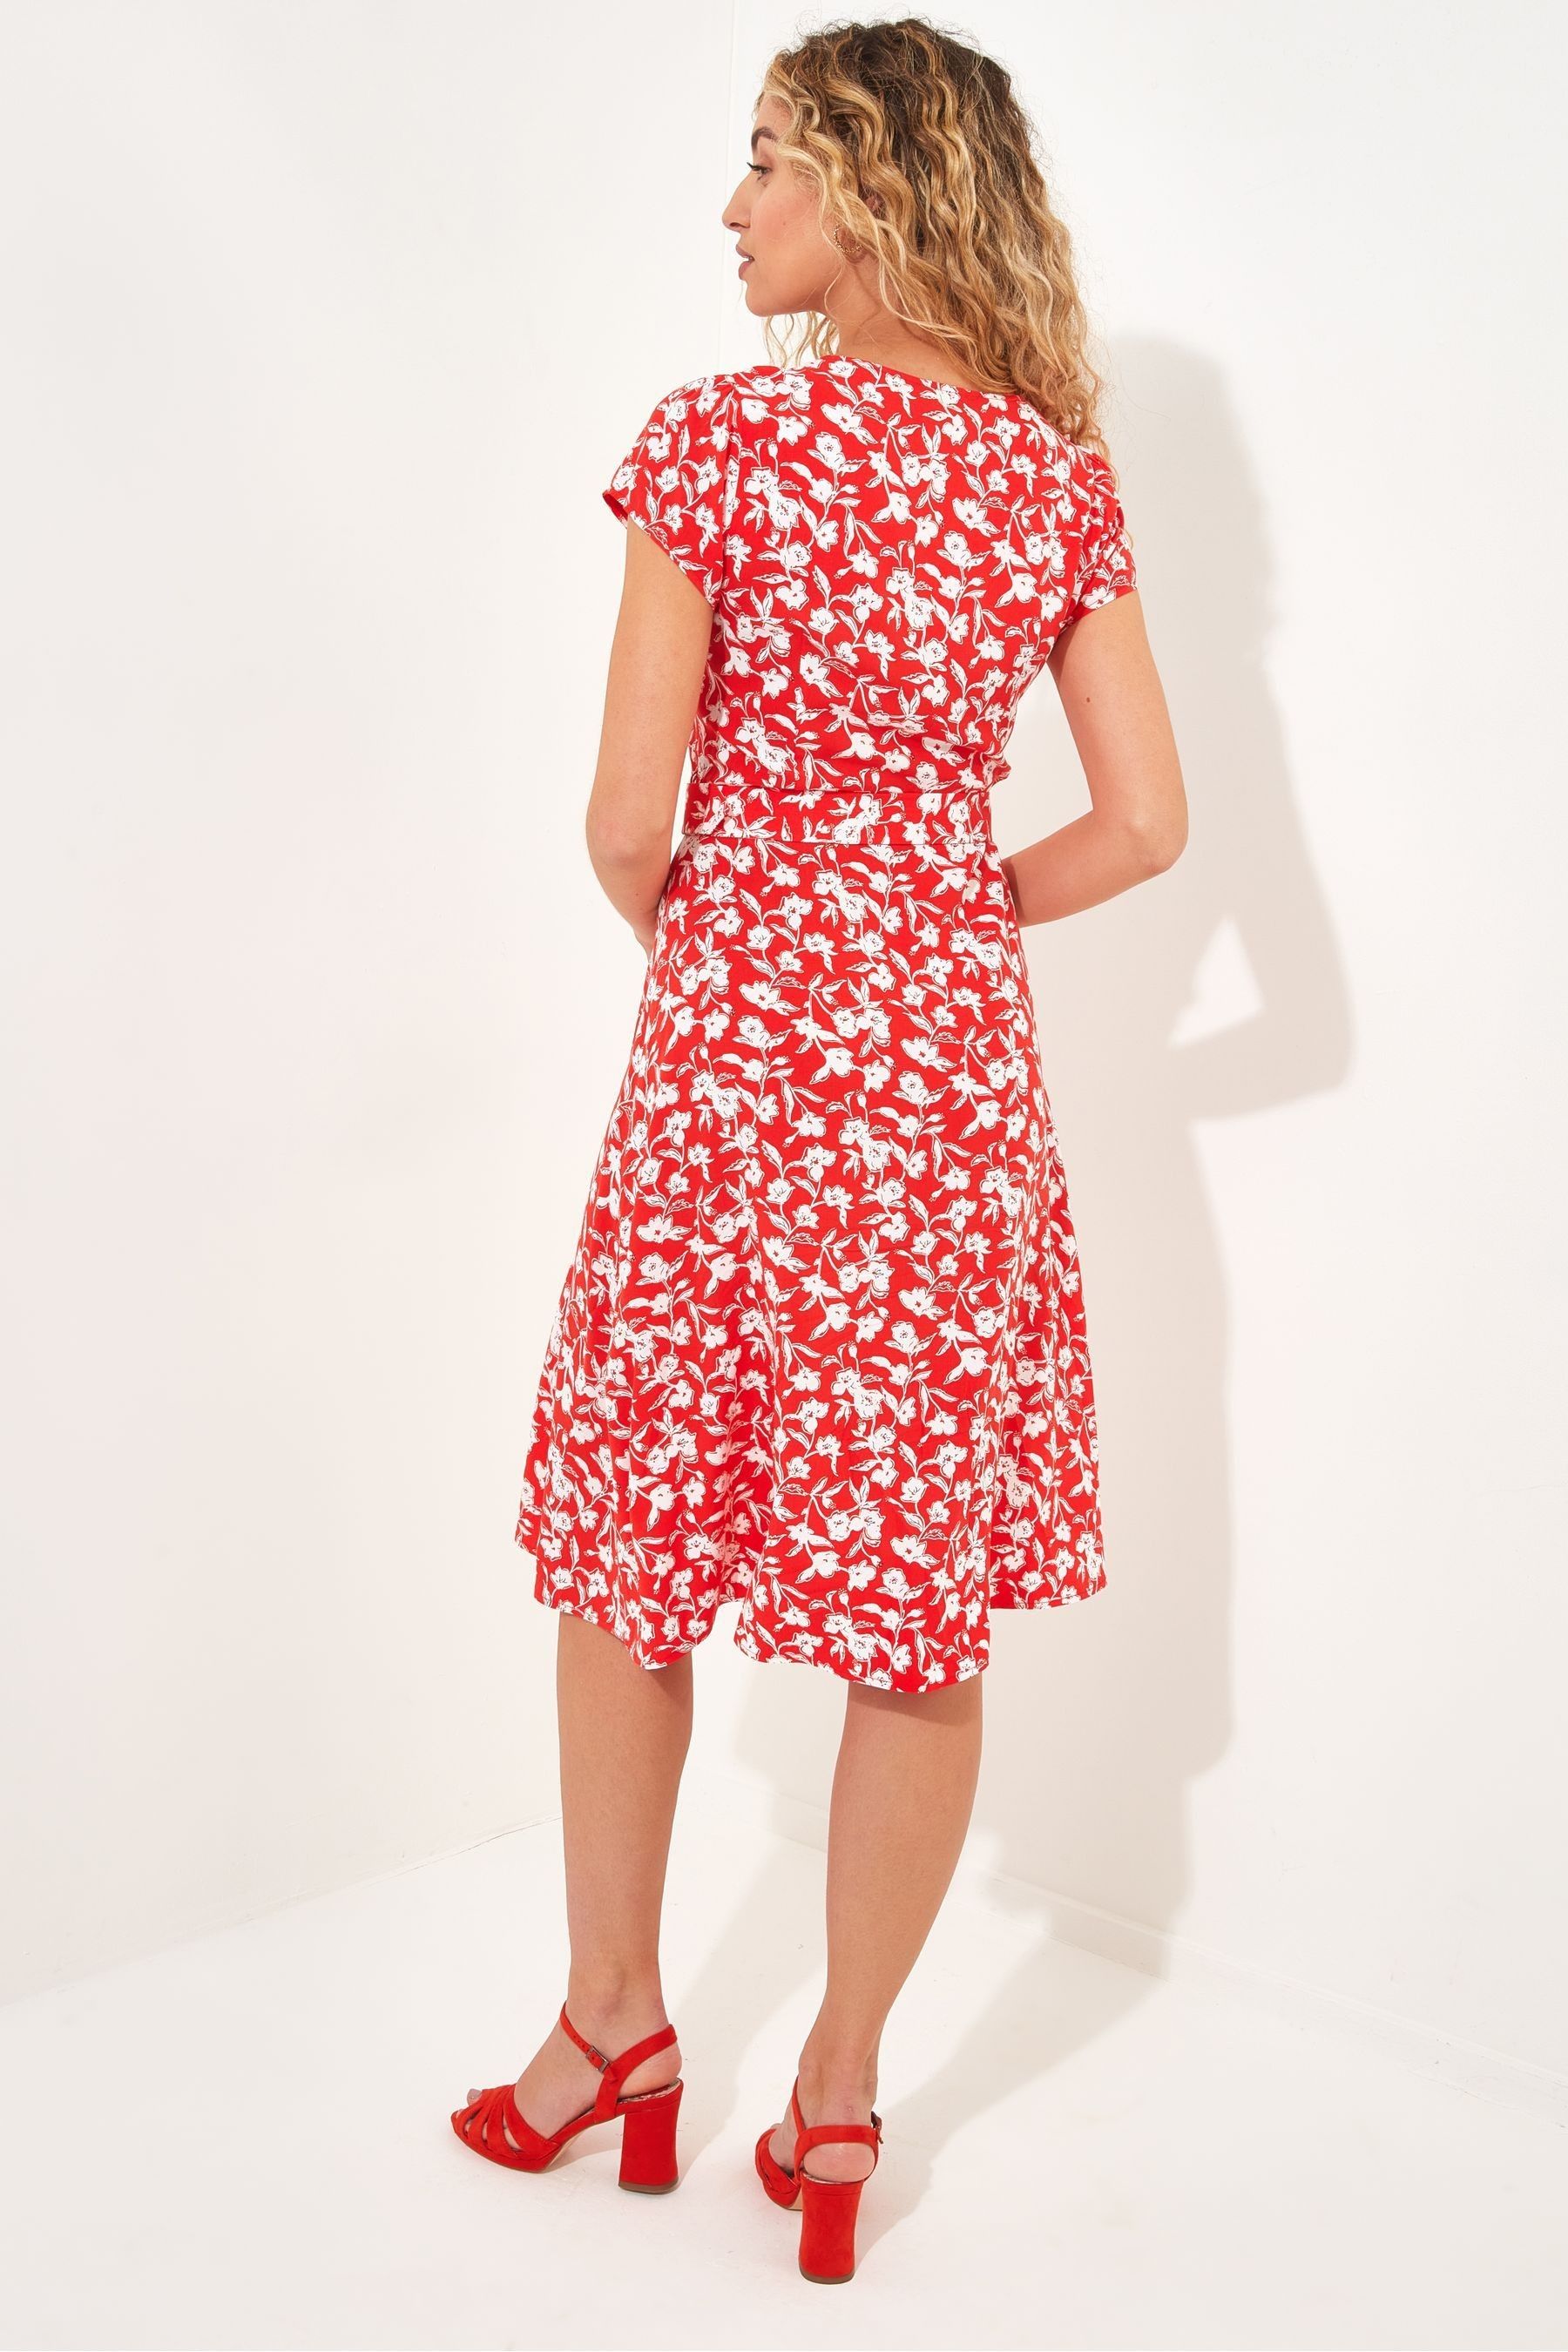 Buy Joe Browns Red Floral Belted Crinkle Dress from the Next UK online shop